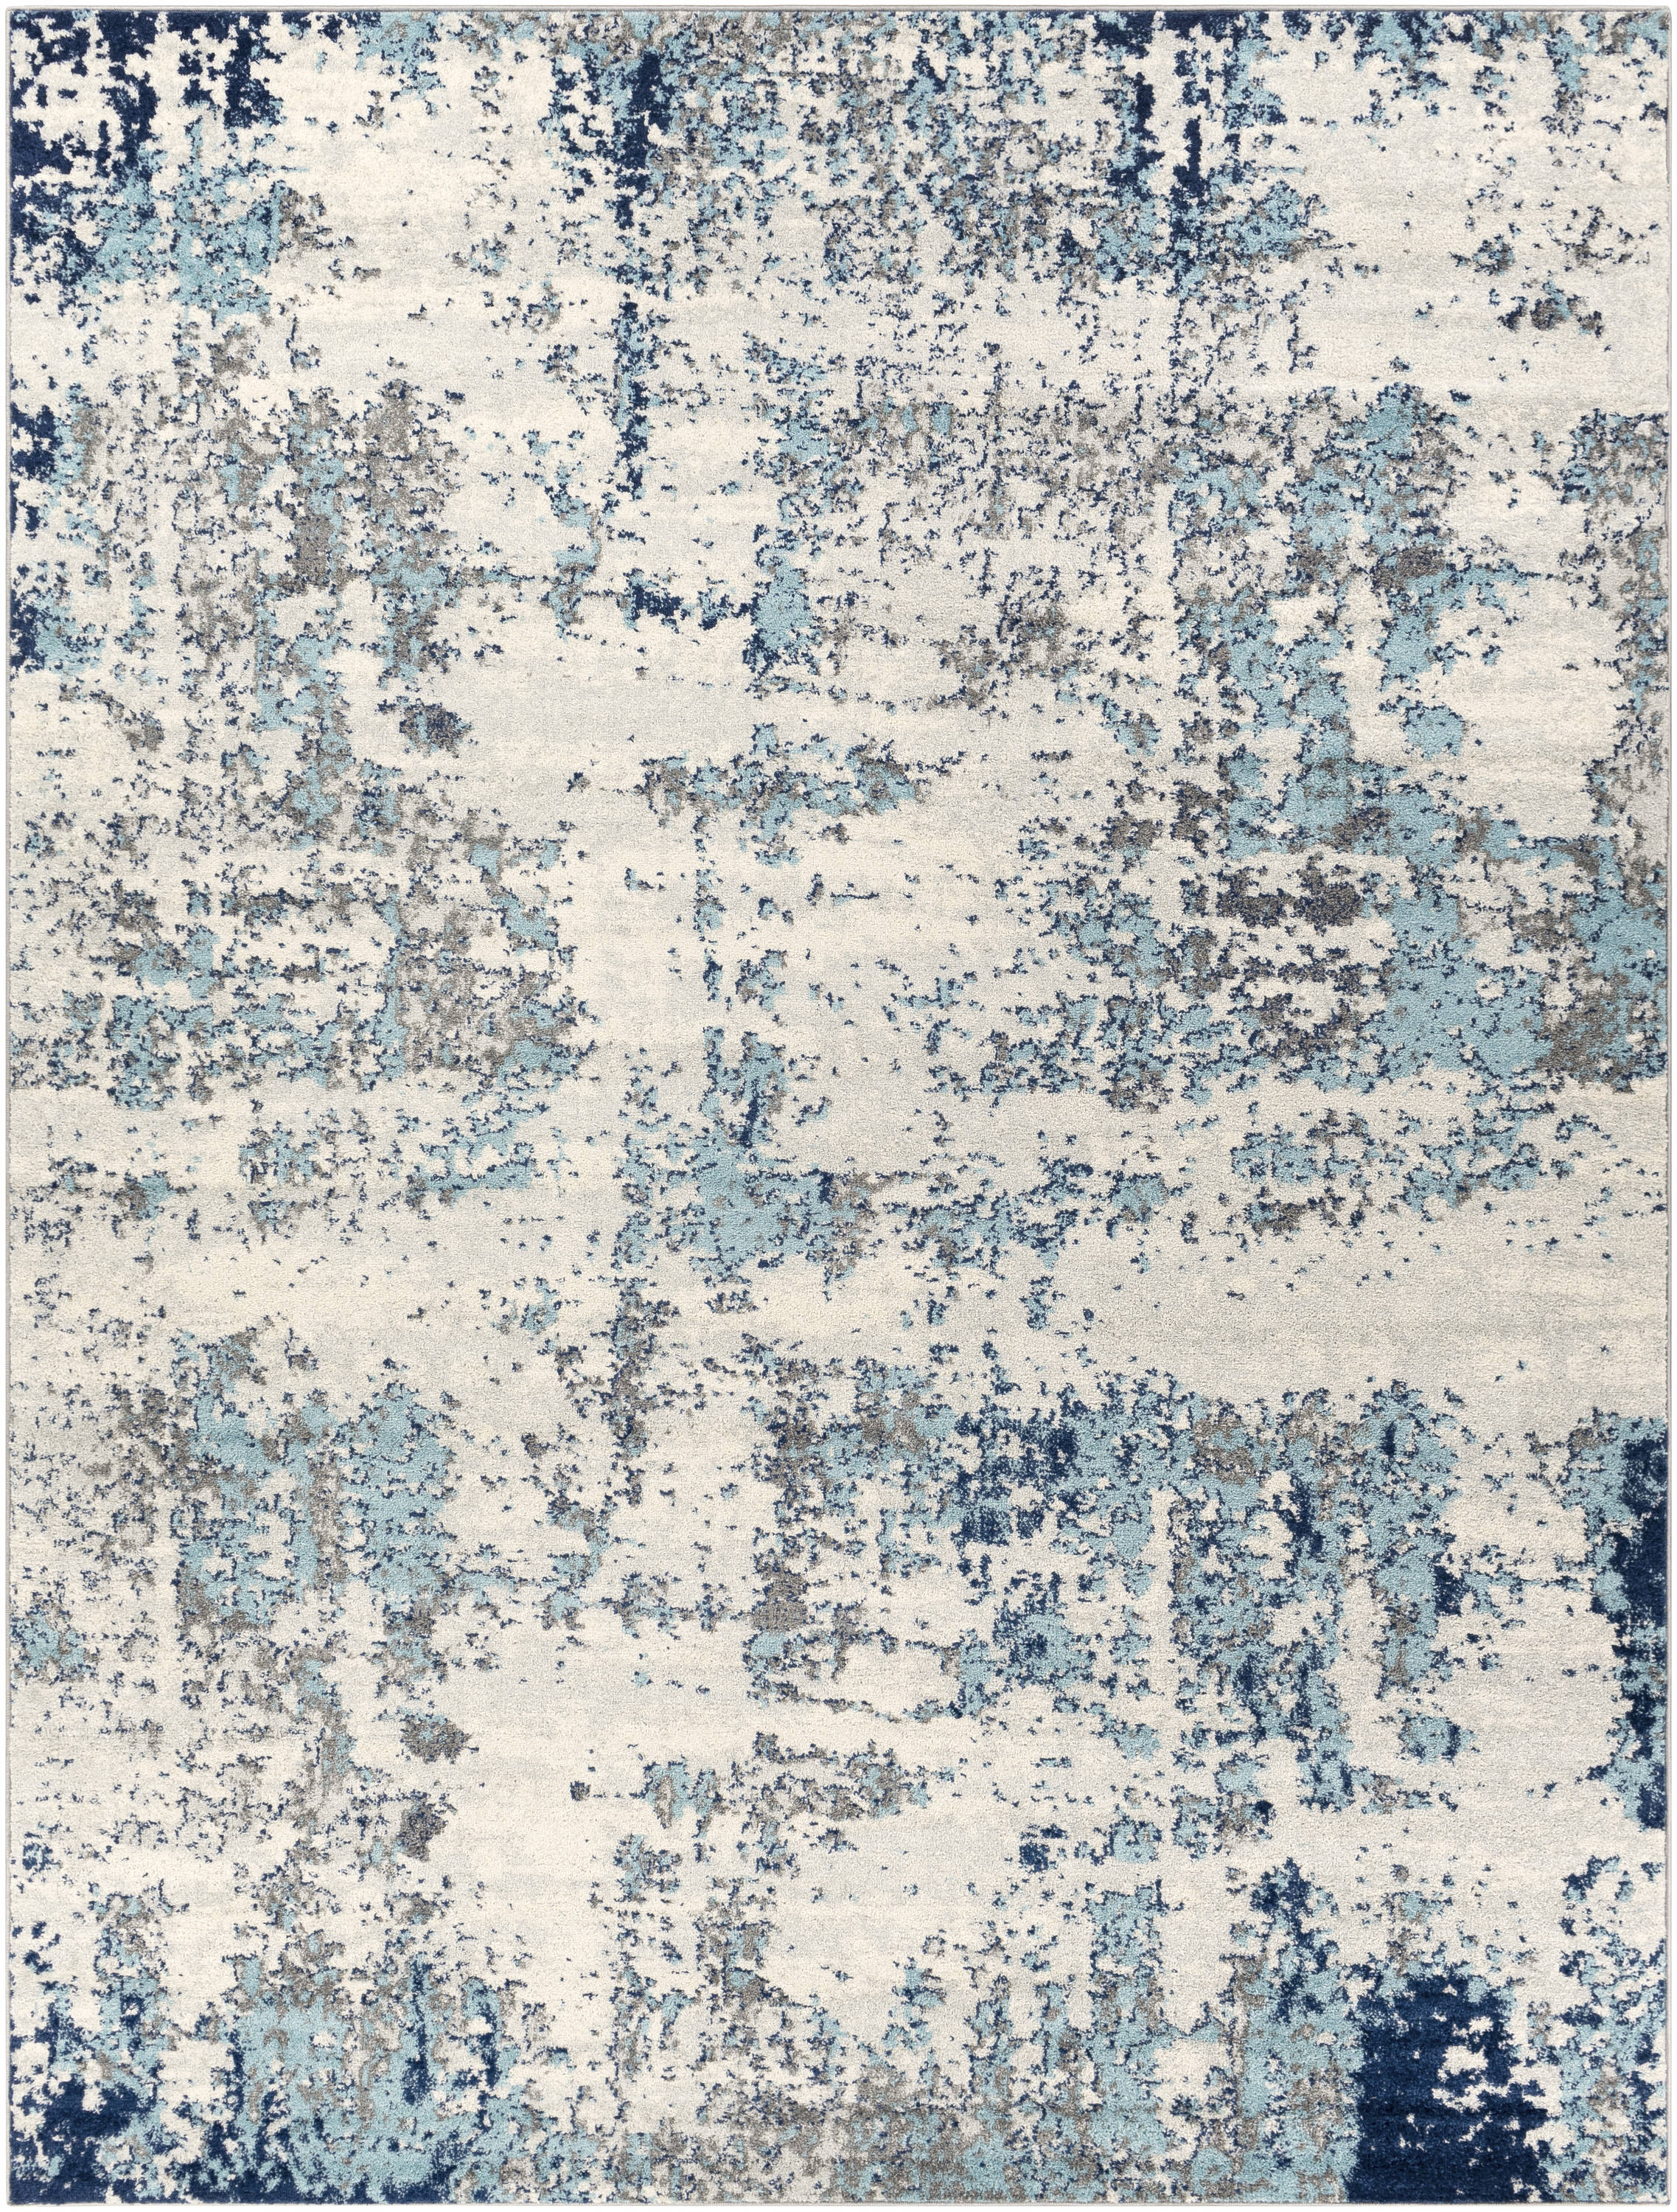 Stay-Put Rugs-1'9x2'10-Blue 